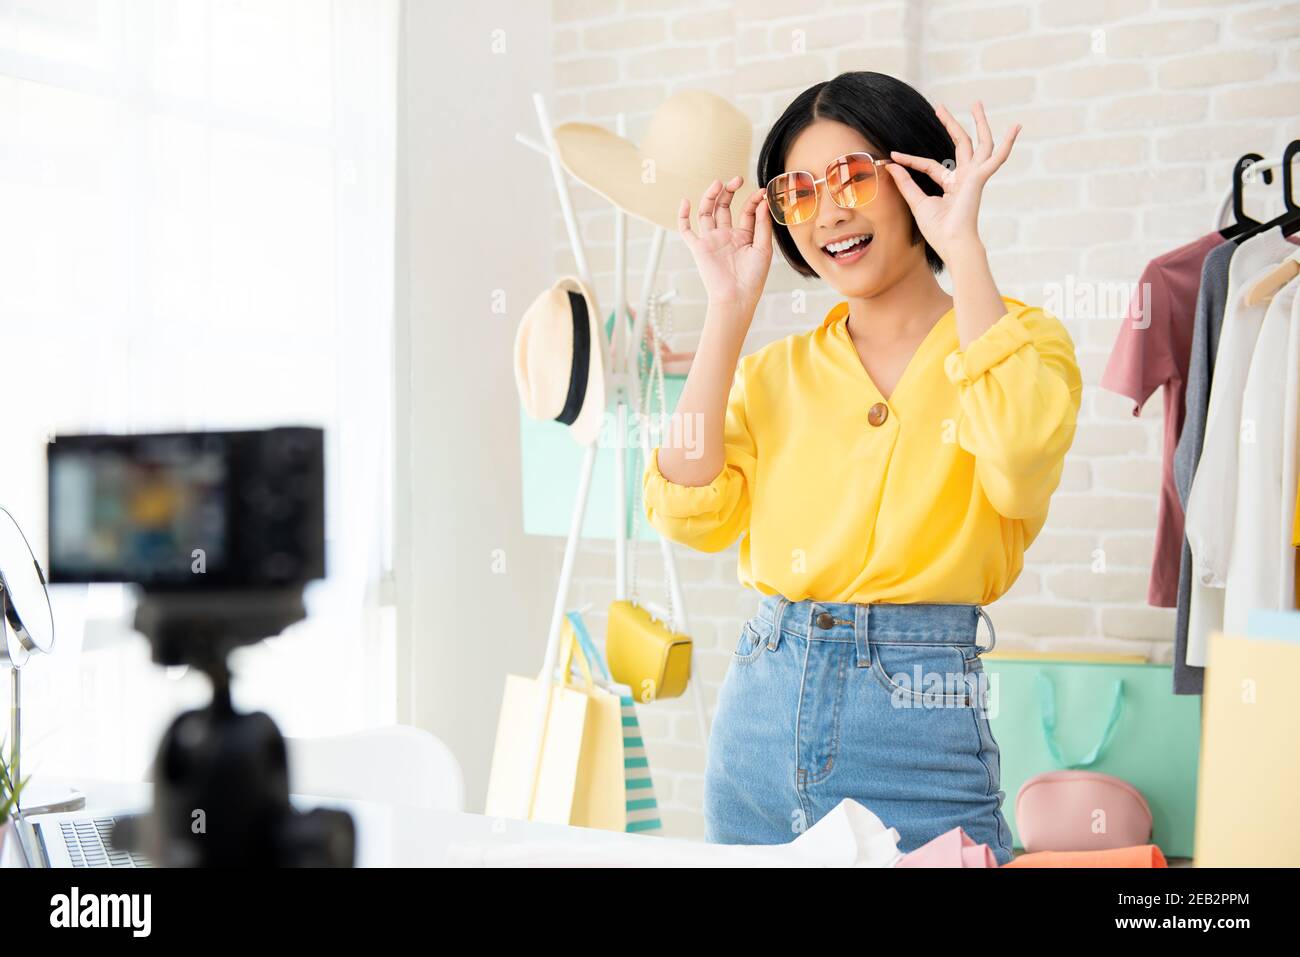 Young Asian woman fashion vlogger trying on clothes and accessories live streaming online Stock Photo